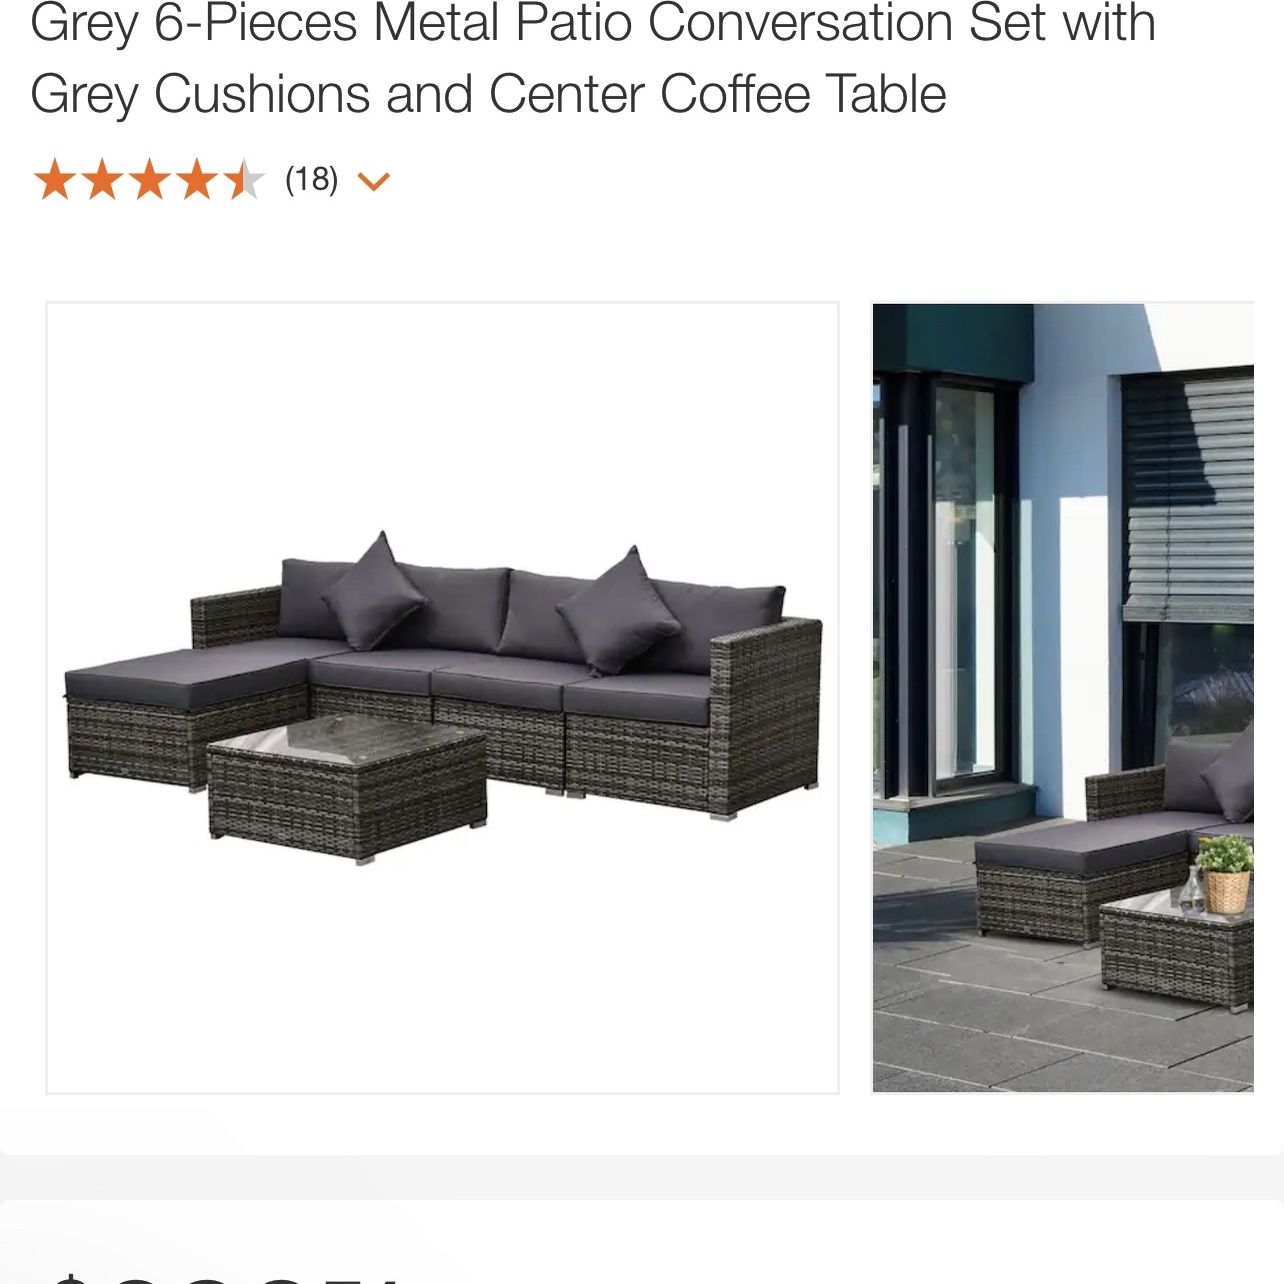 Outsunny Grey 6-Pieces Metal Patio Conversation Set with Grey Cushions and Center Coffee Table